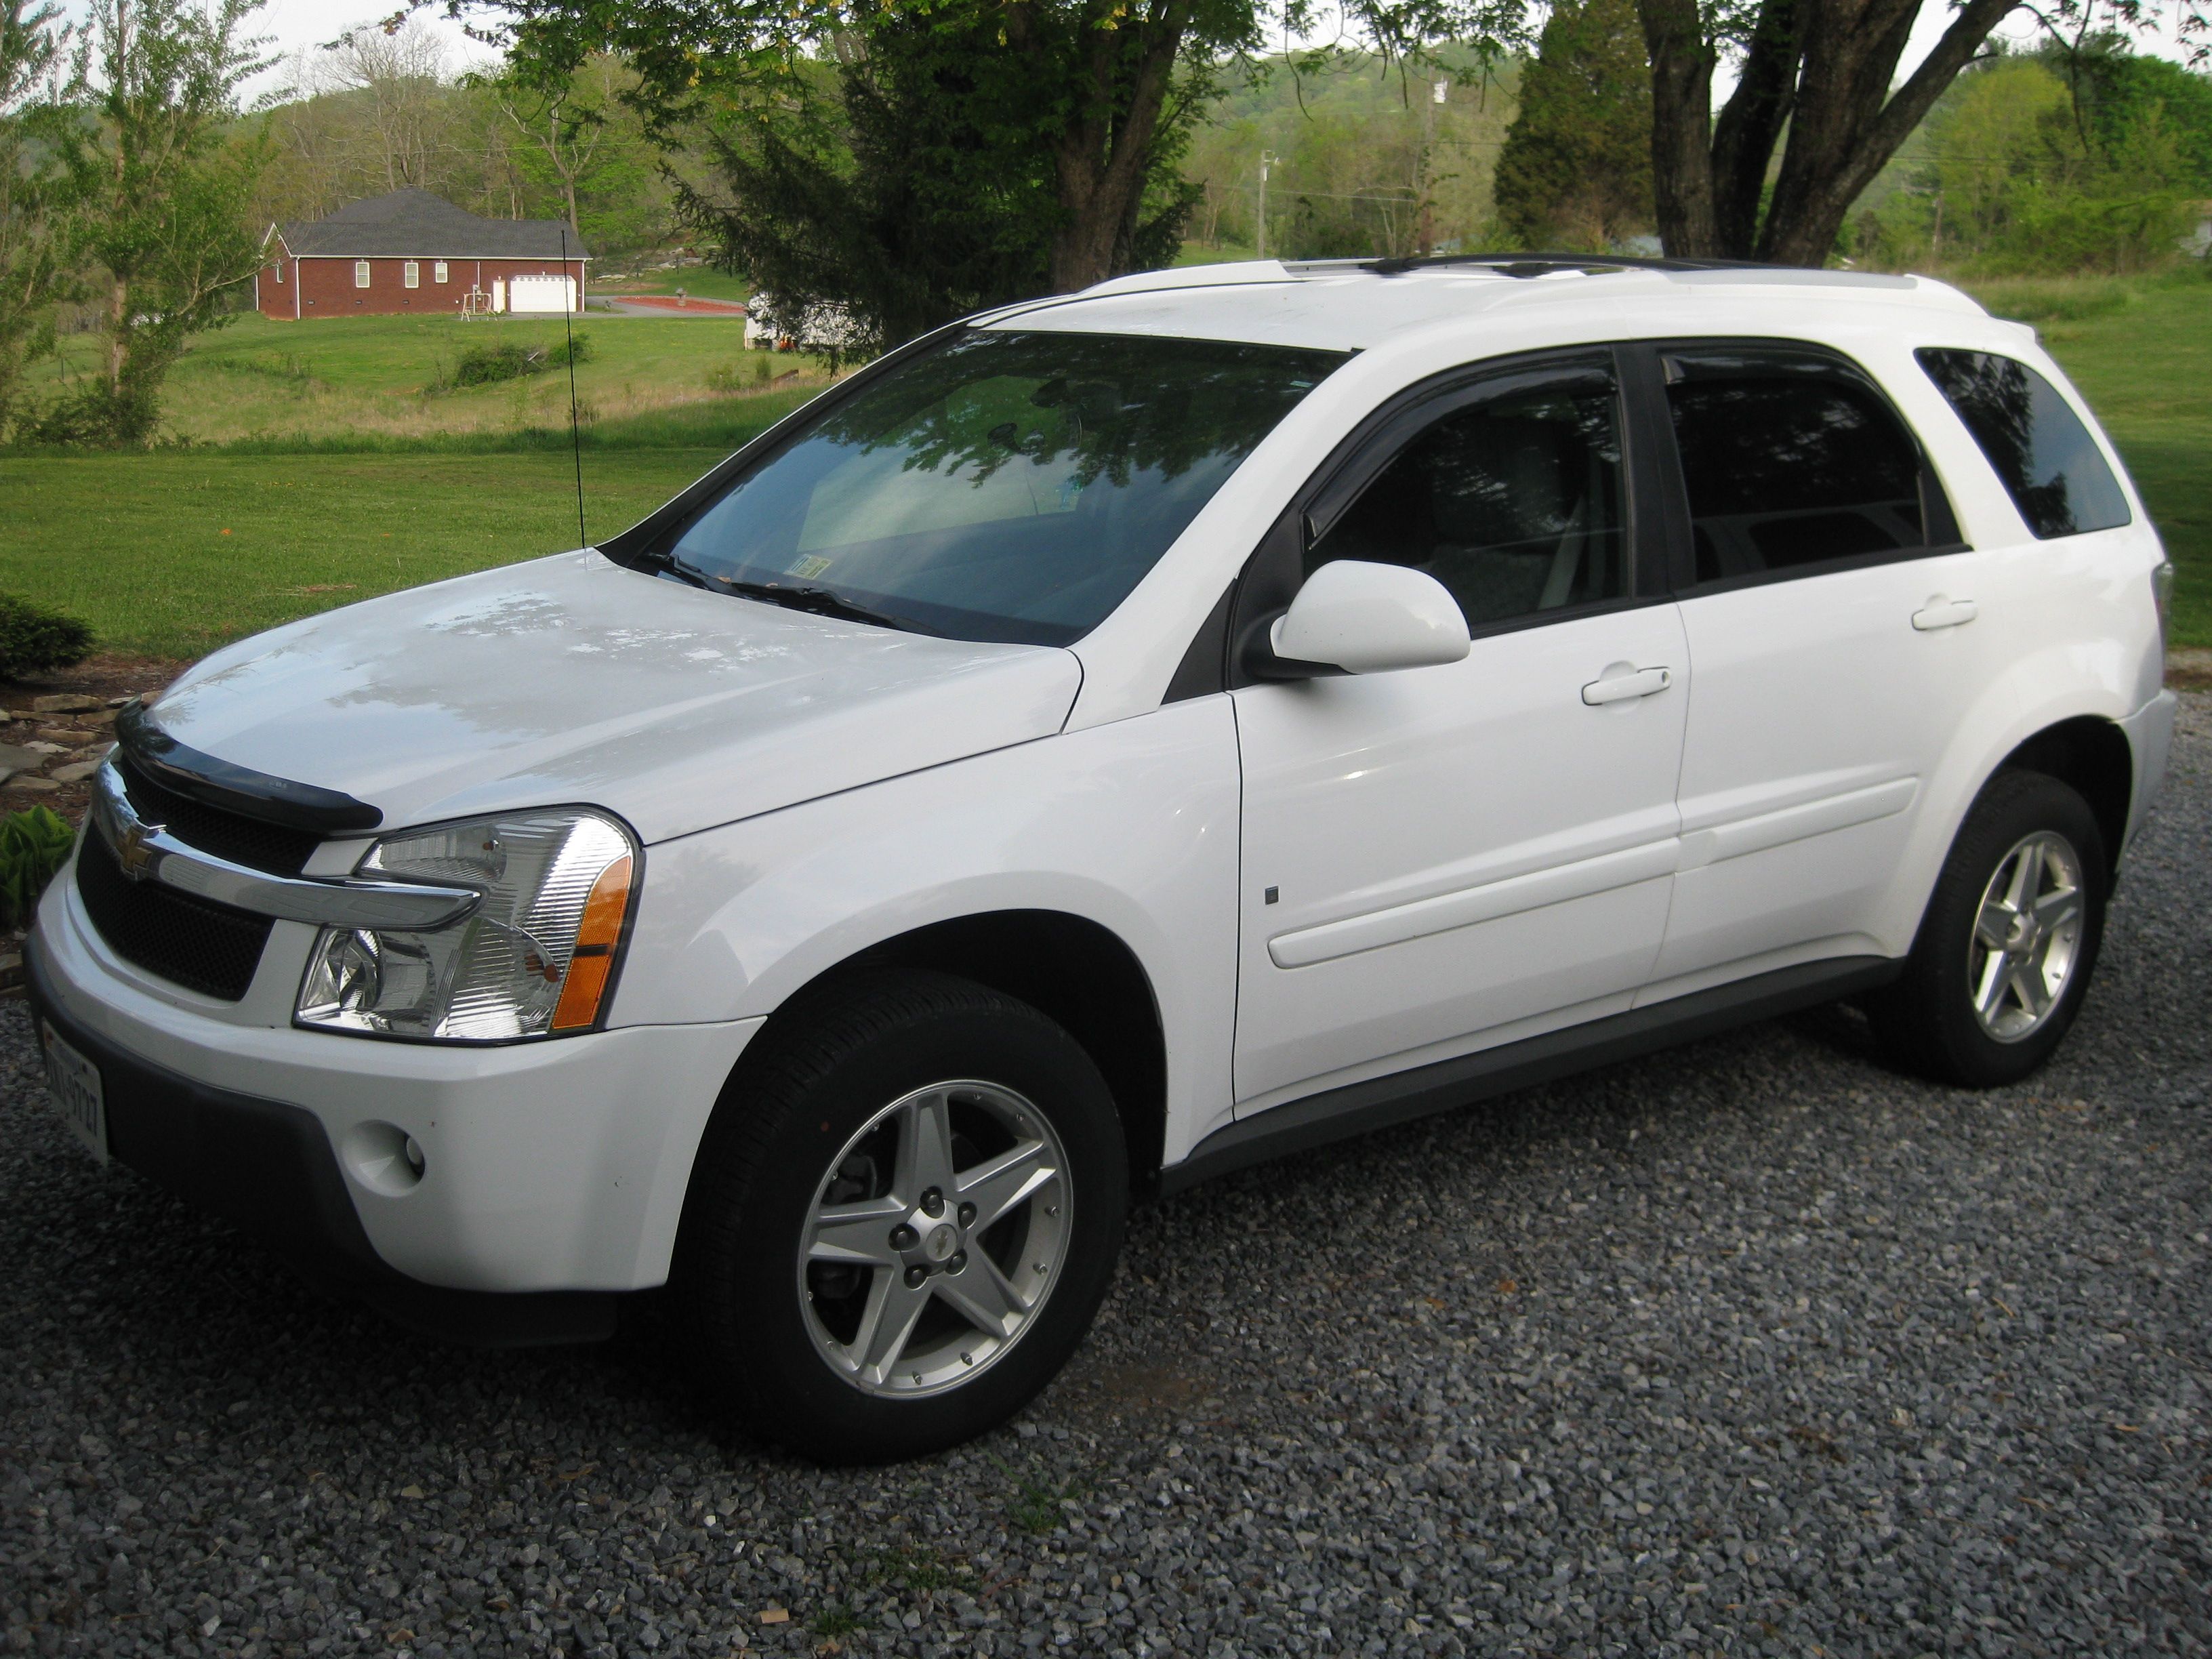 2006 Chevy Equinox 87K AWD Arctic White Needs nothing and has never had any  repairs. Keyless Entry Traction Control ABS (4-W… | Chevy equinox, Chevy,  Air bag